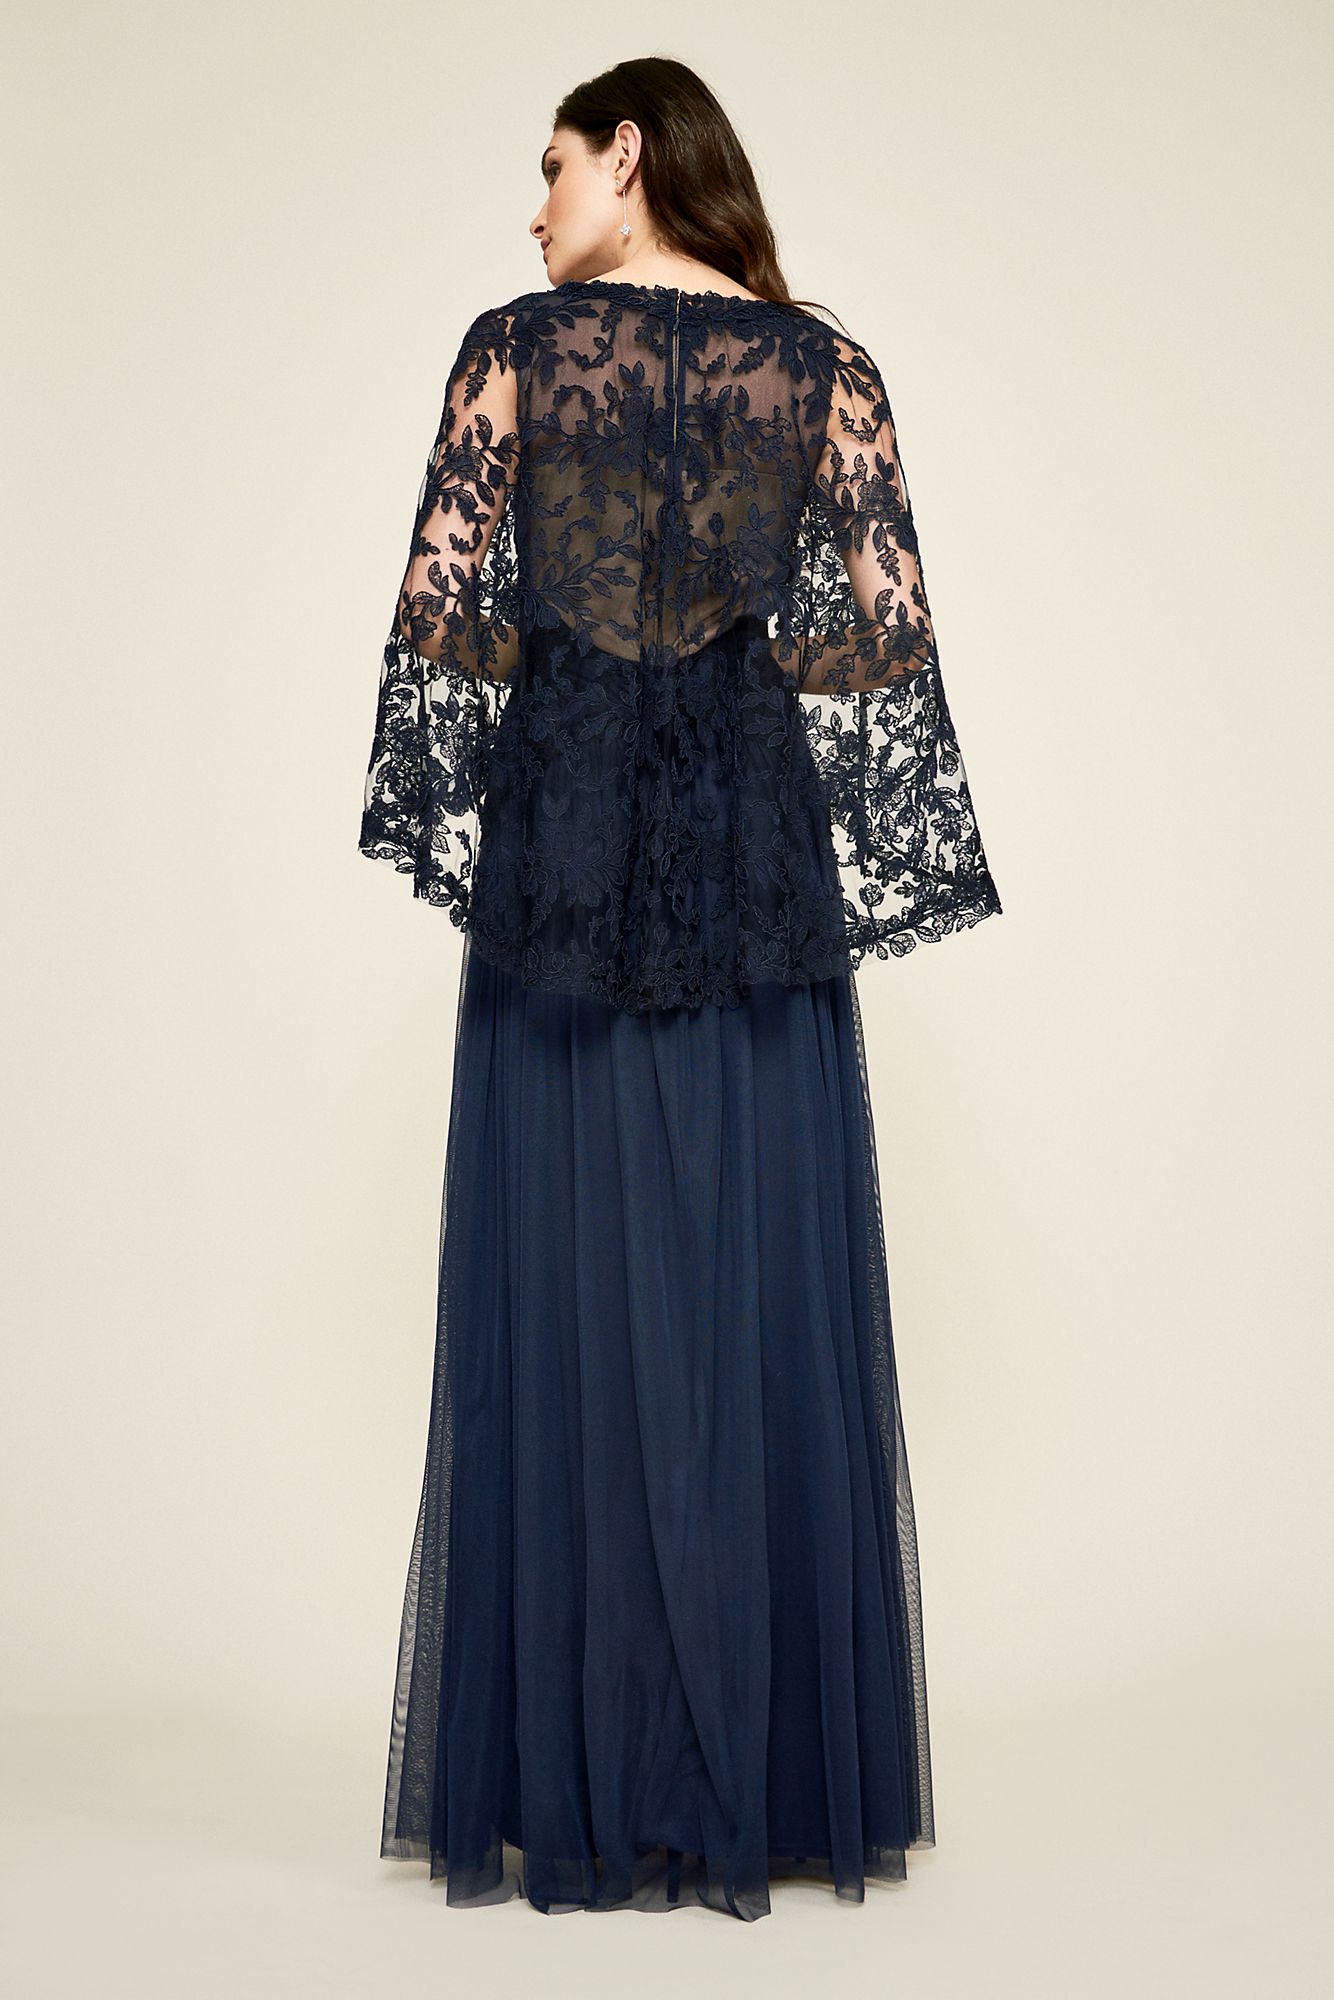 Corded Tulle Dress with Sheer Cape Overlay BDH18390L